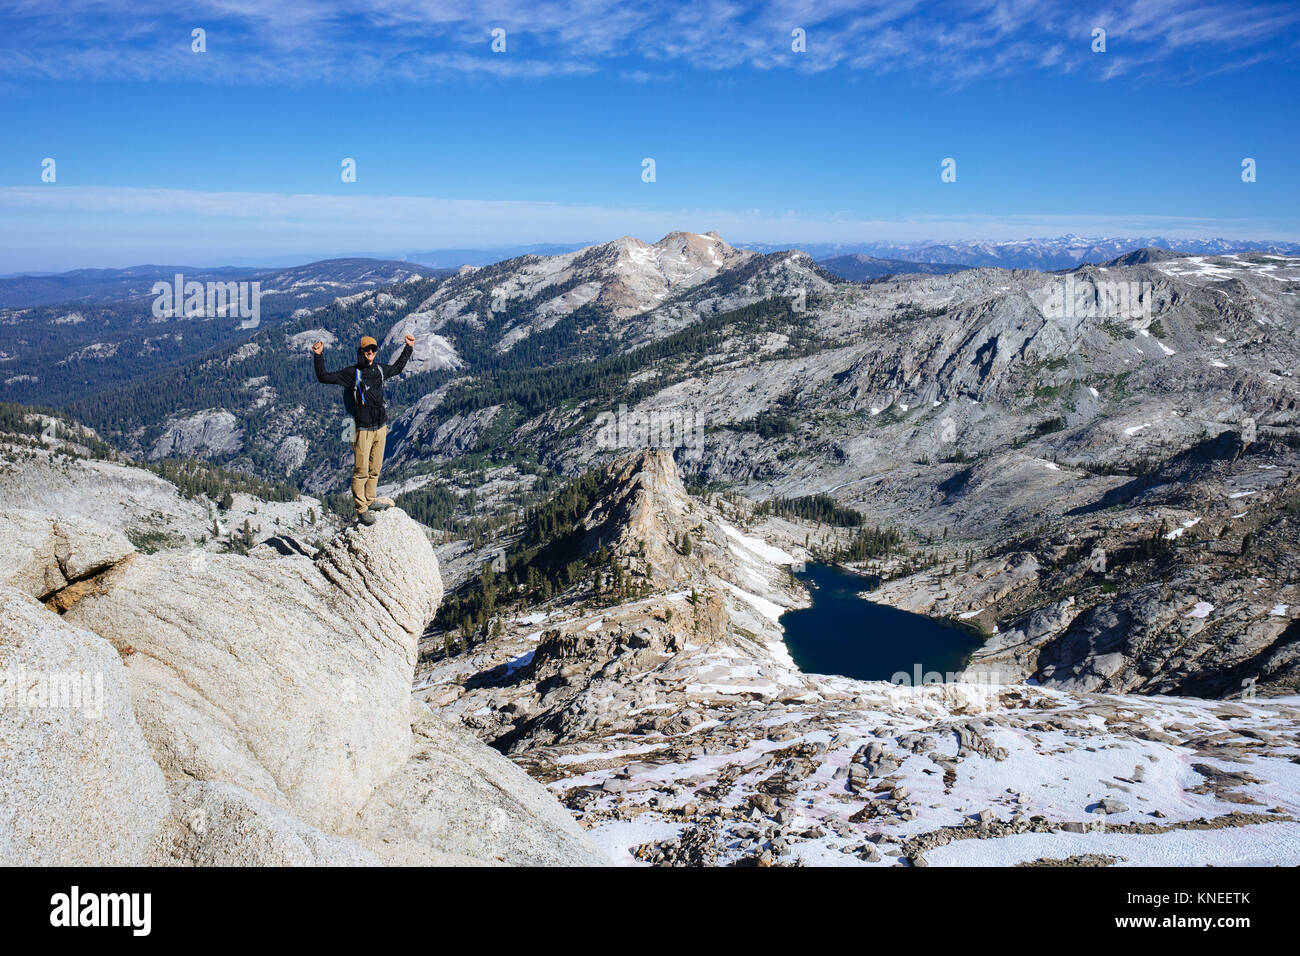 Man standing on Alta Peak with arms raised, Pear lake and Giant Sequoia forest in the distance, California, United States Stock Photo